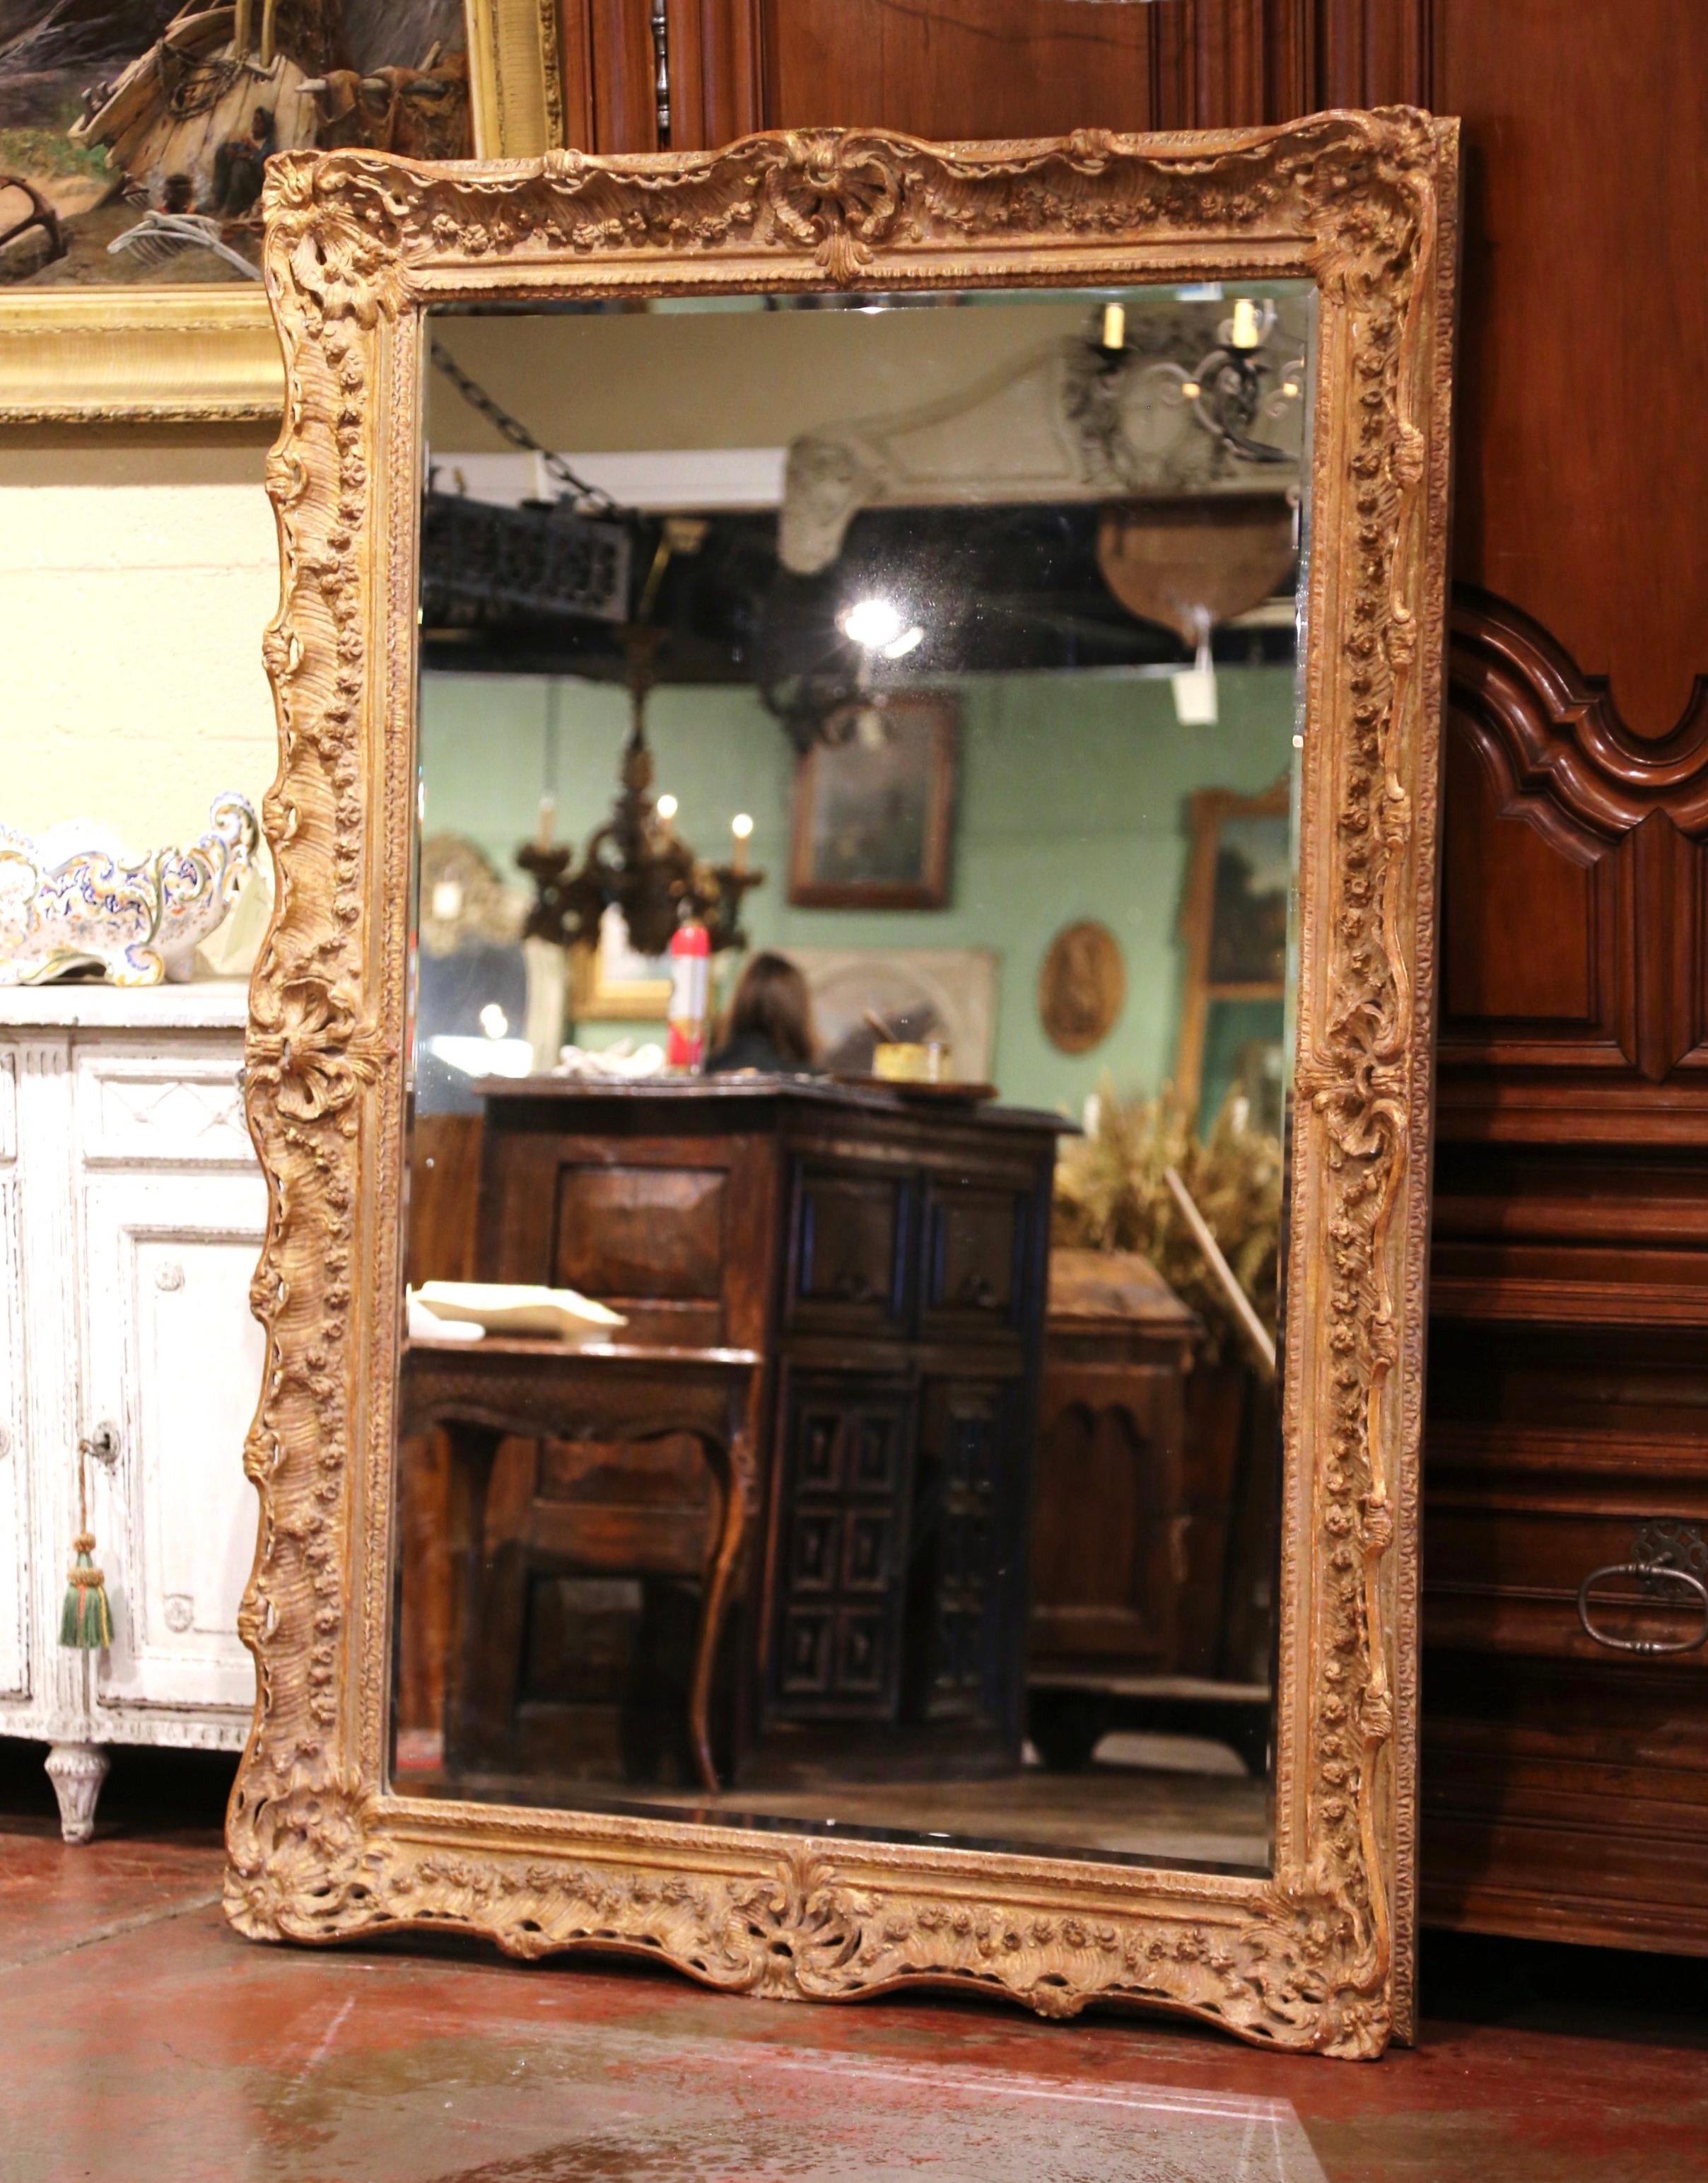 This elegant mirror was created in France, circa 1950. Rectangular in shape, the large mirror can be hang vertically or horizontally; the frame features exquisite hand carved floral decor, and is embellished with a cartouche shell motif in each